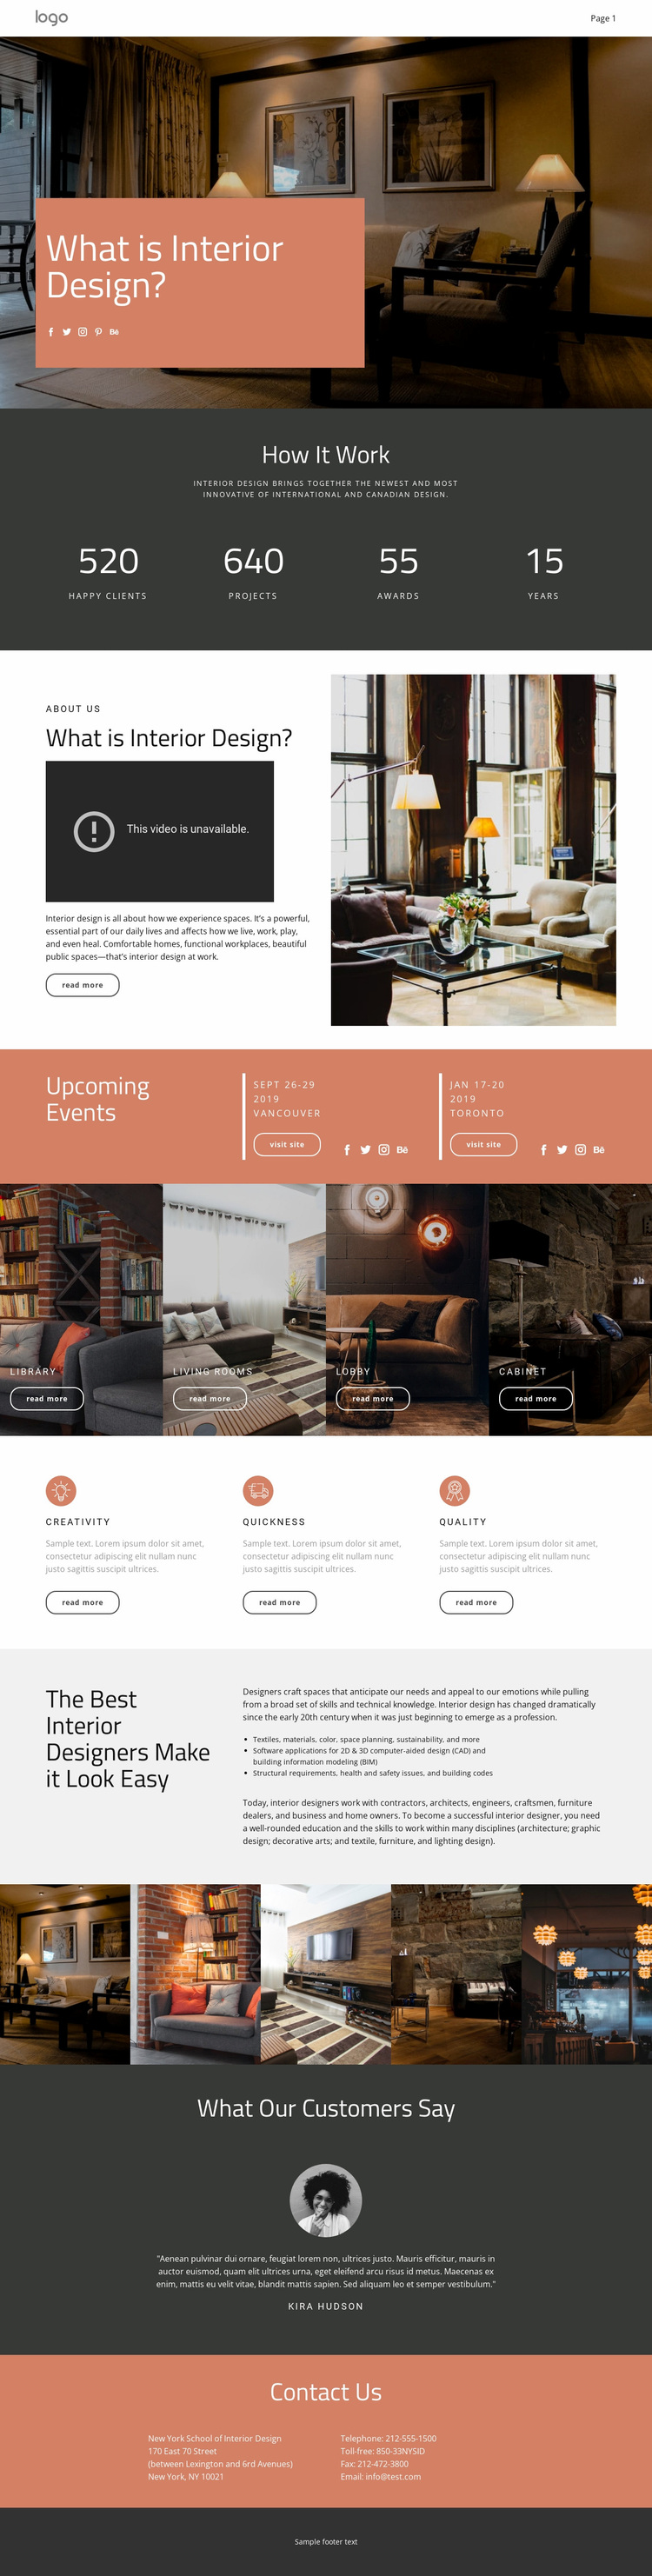 Design of houses and apartments Website Design